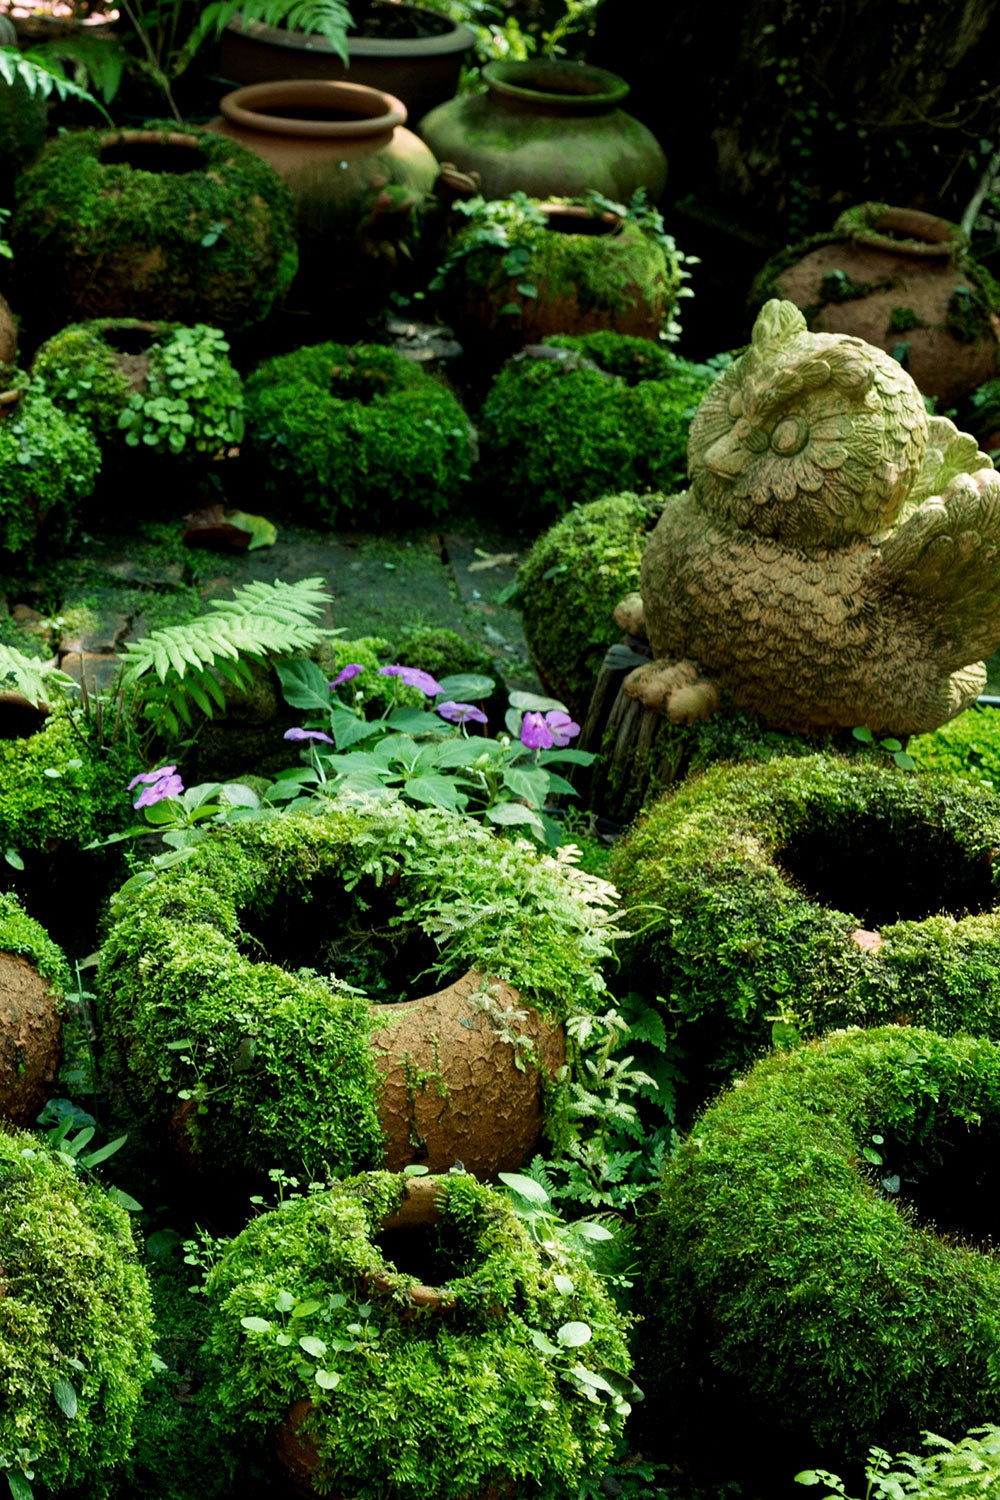 Make DIY Moss Covered Pots and Garden Figurines with Living Paint